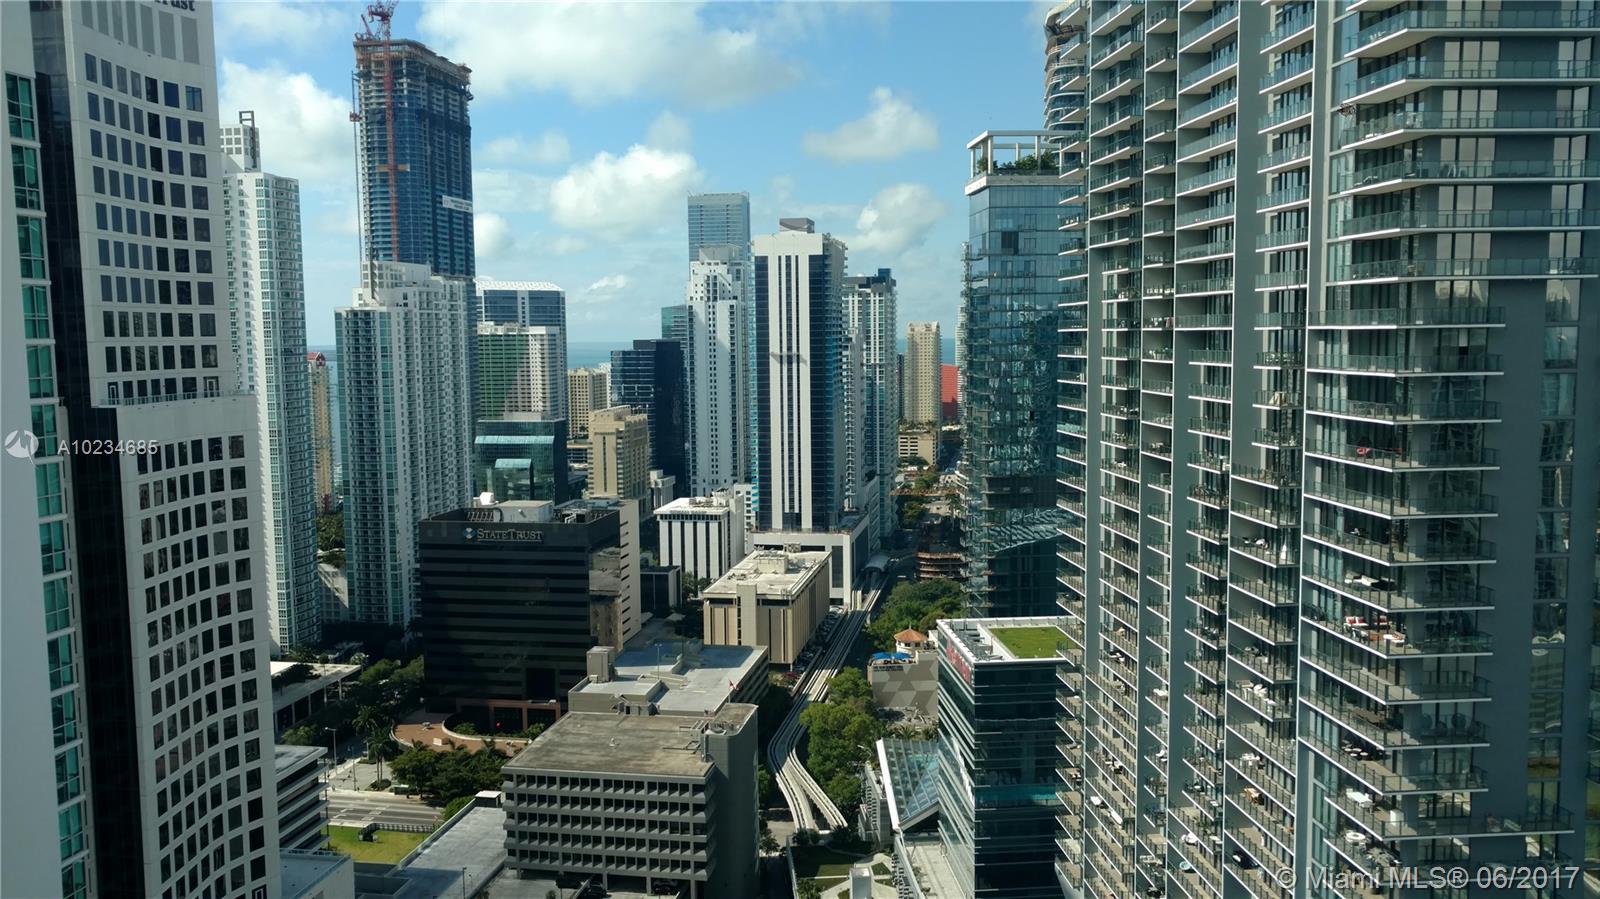 Brickell on the River South image #20